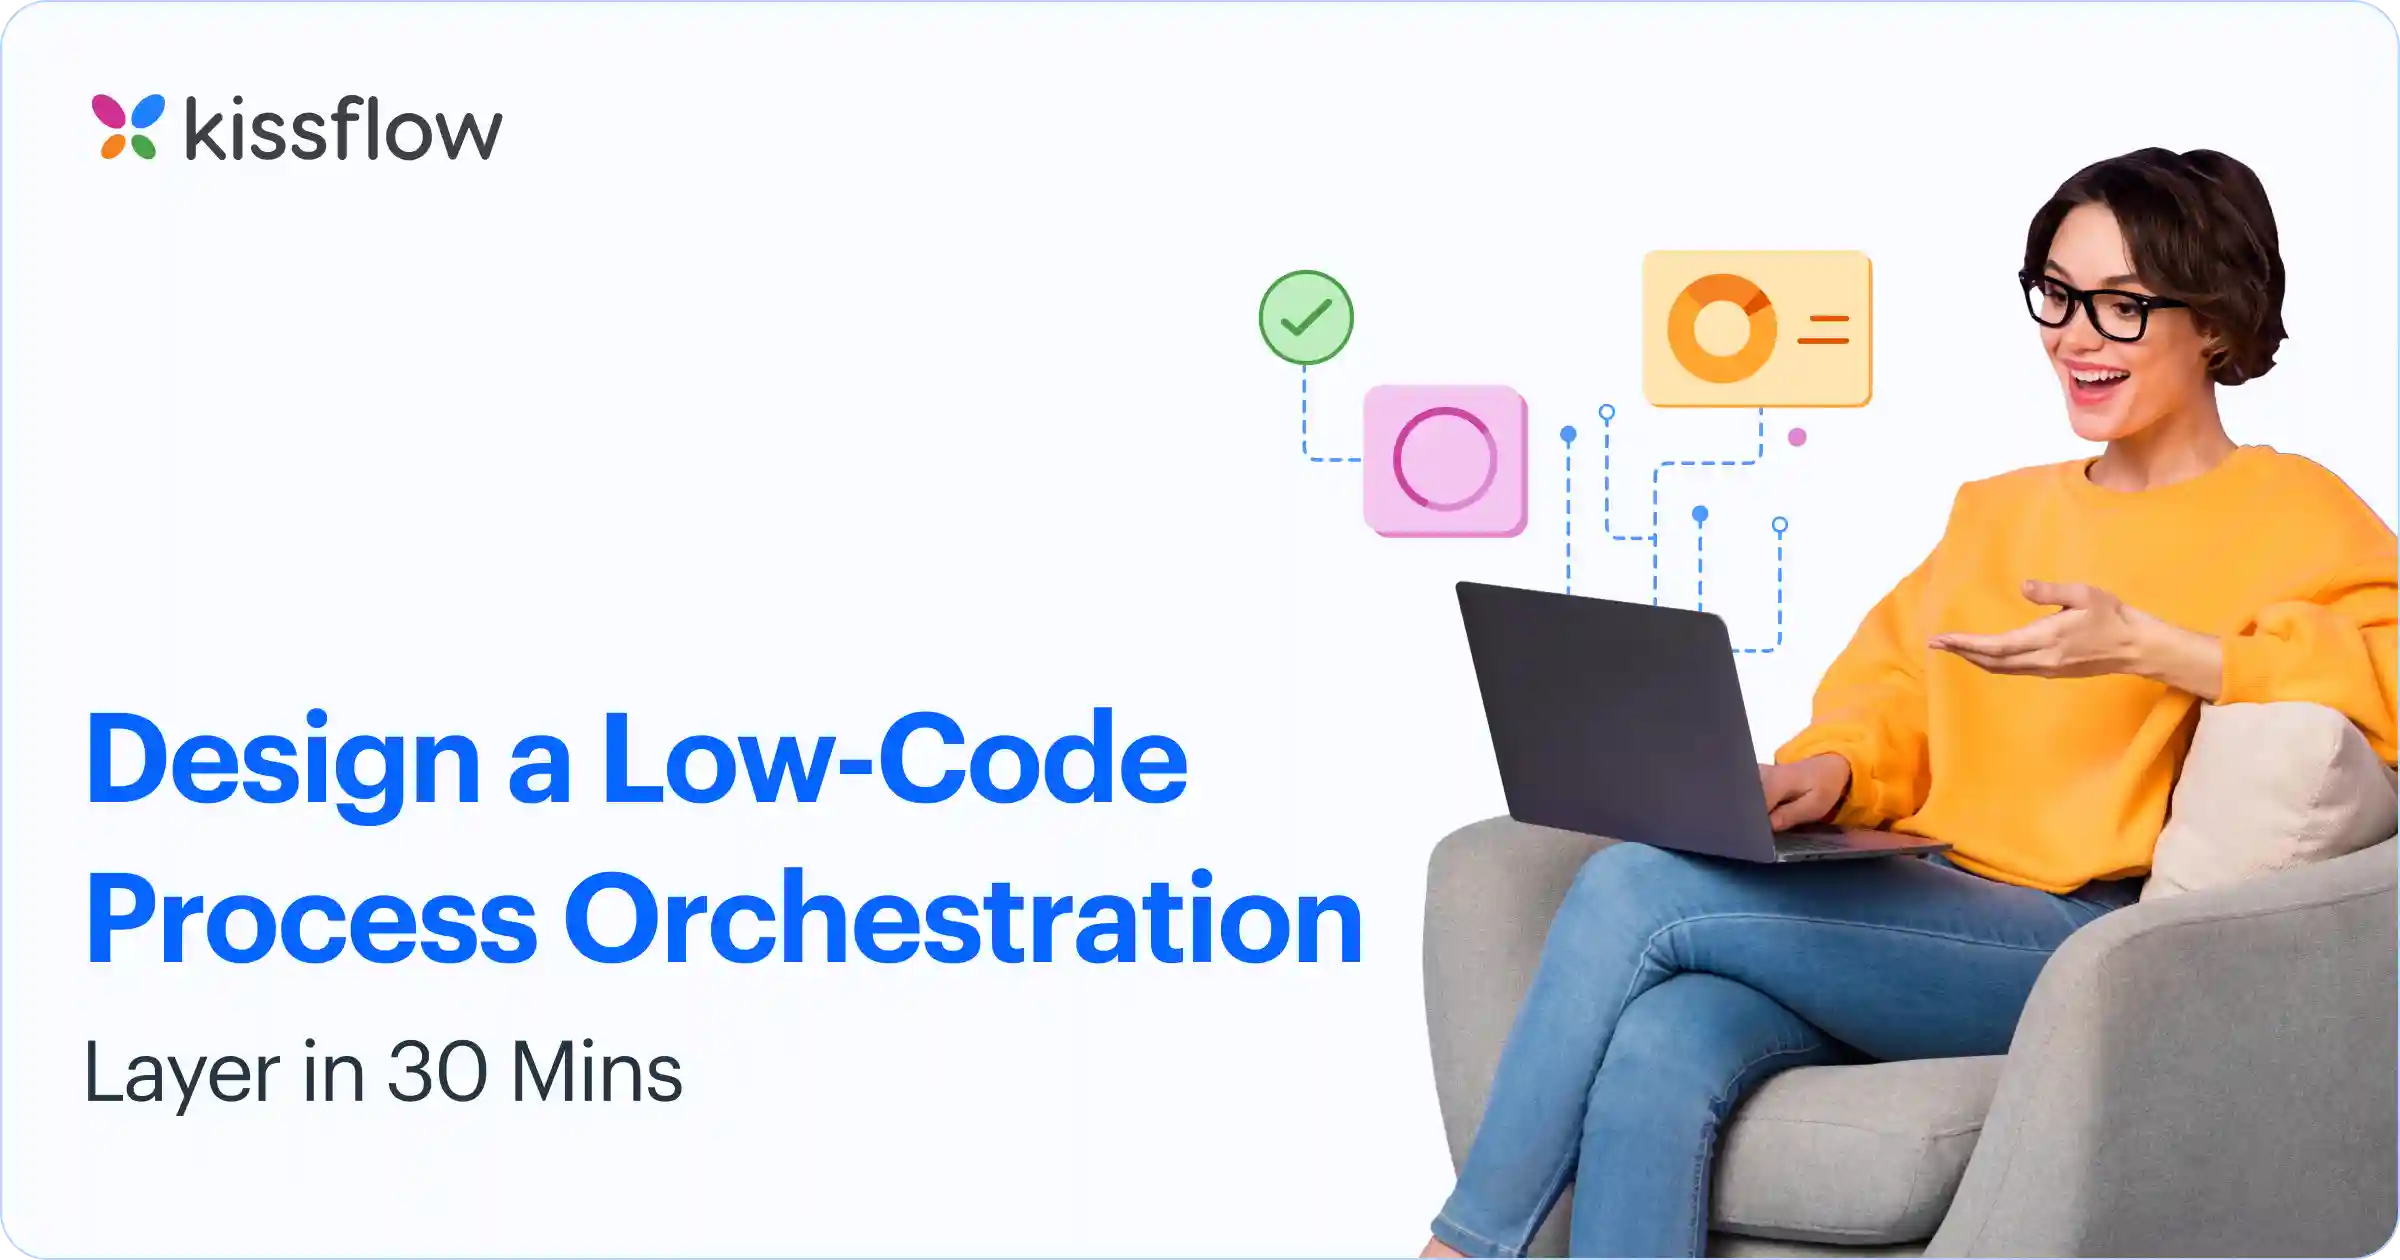 Design a Low-Code Process Orchestration Layer in 30 Mins